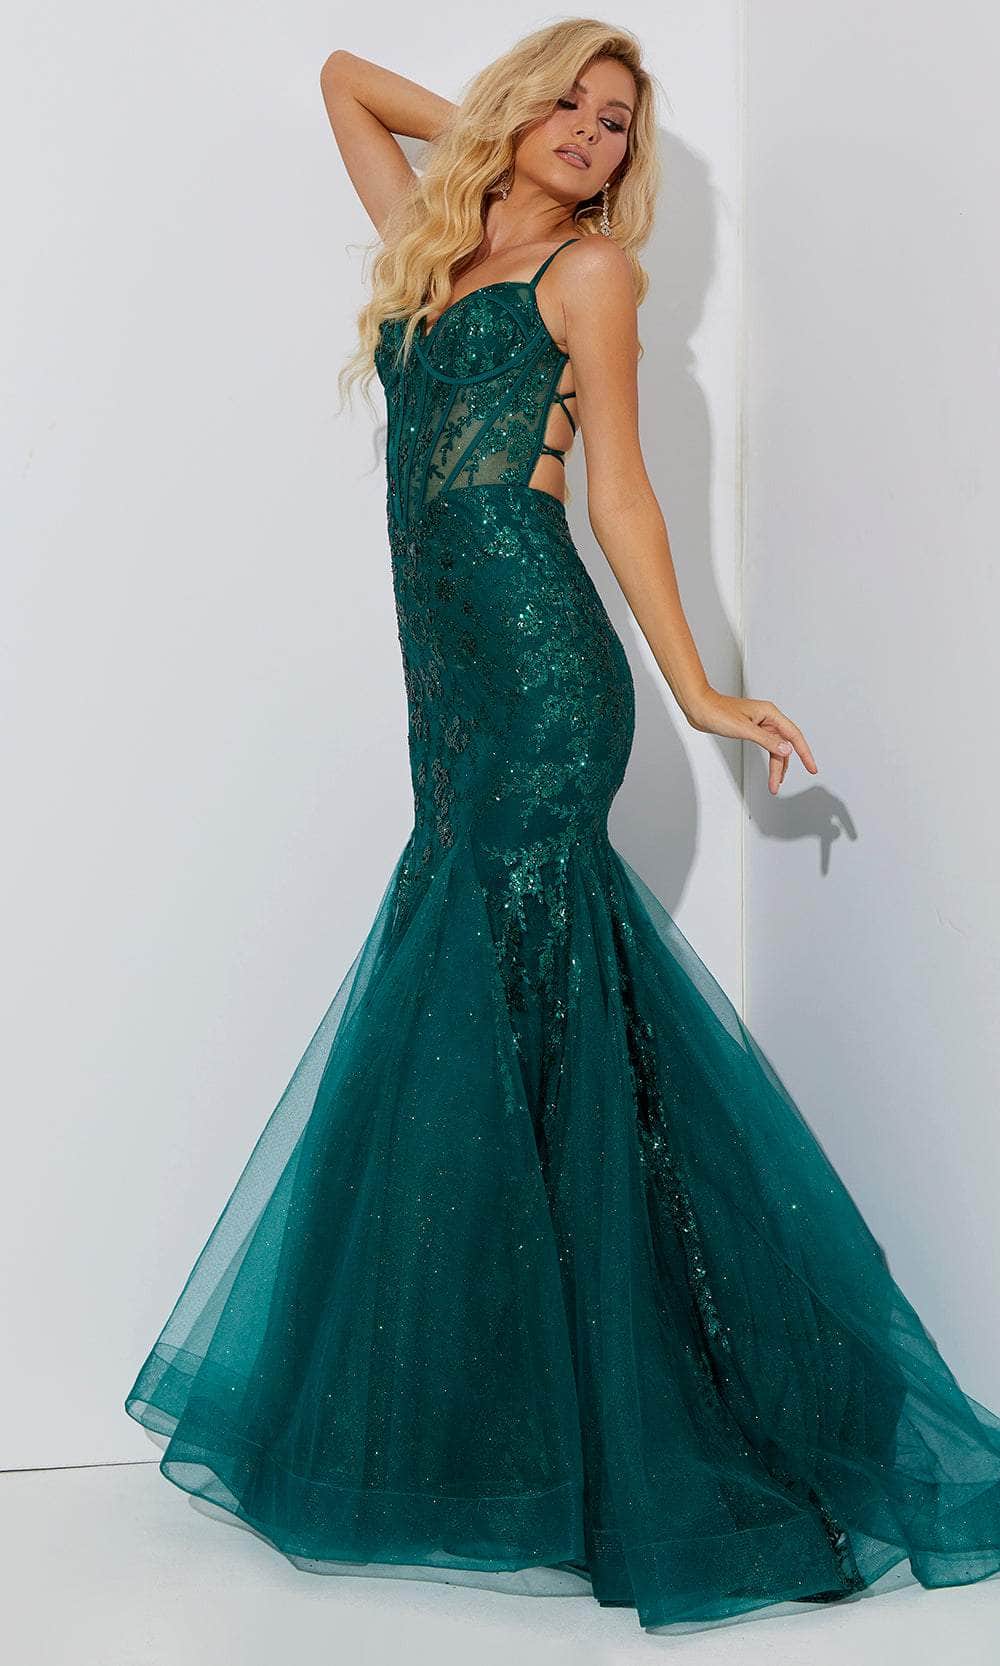 Image of Jasz Couture 7557 - Sequin Bustier Prom Dress